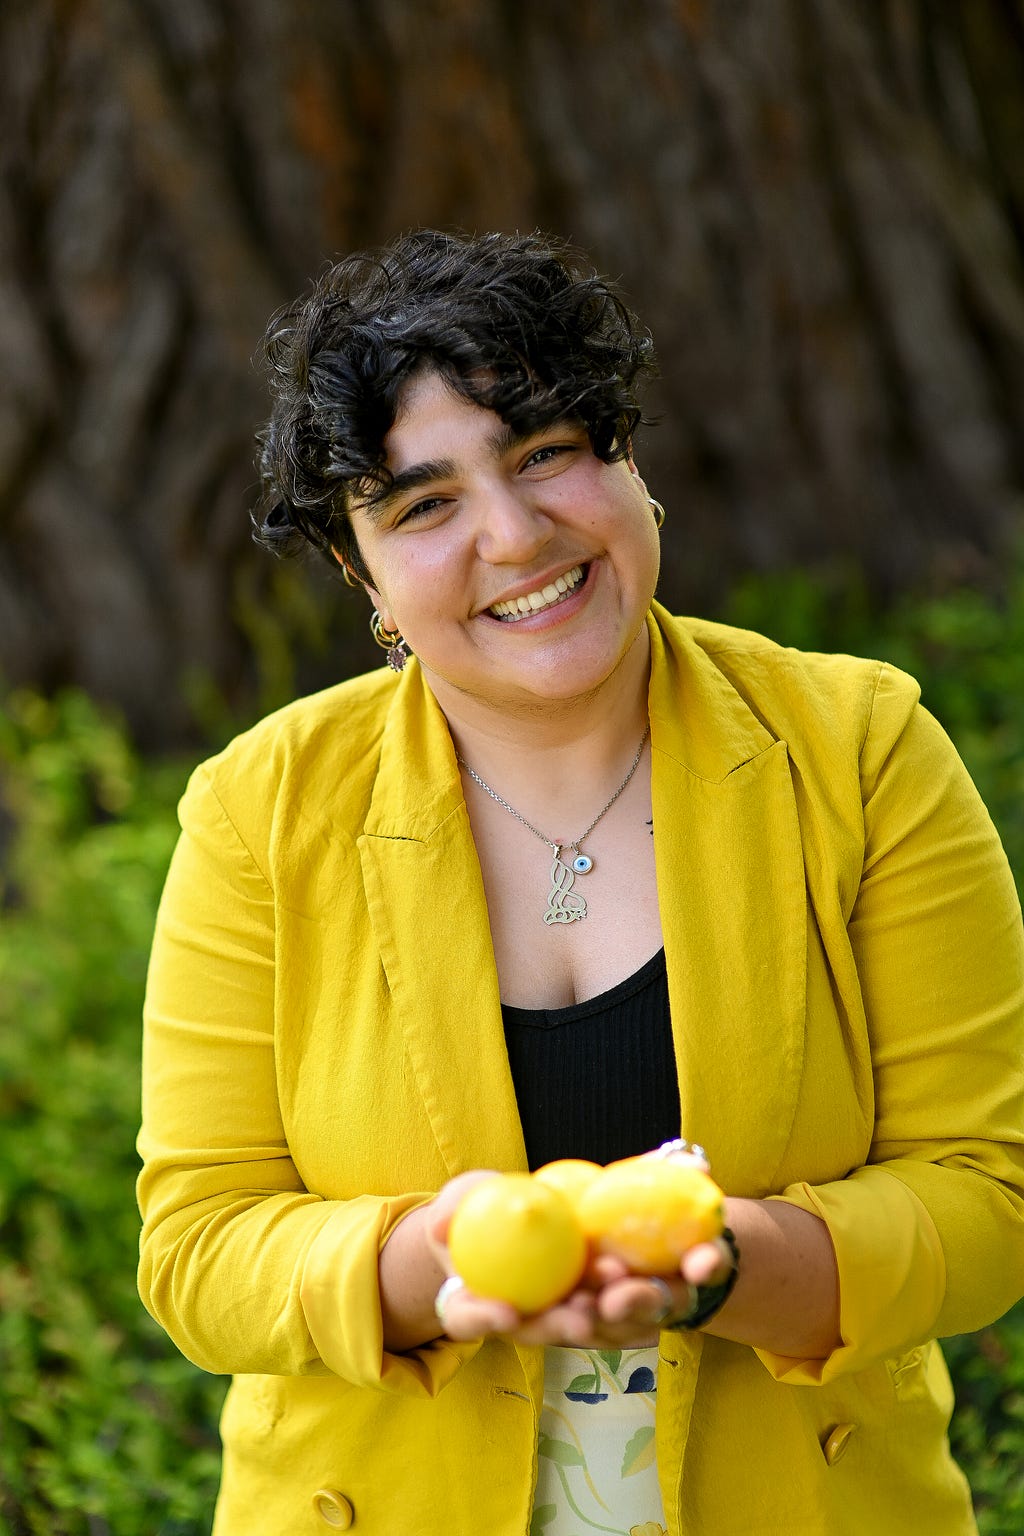 A person wearing a yellow jacket smile at the camera. They are holding lemons.